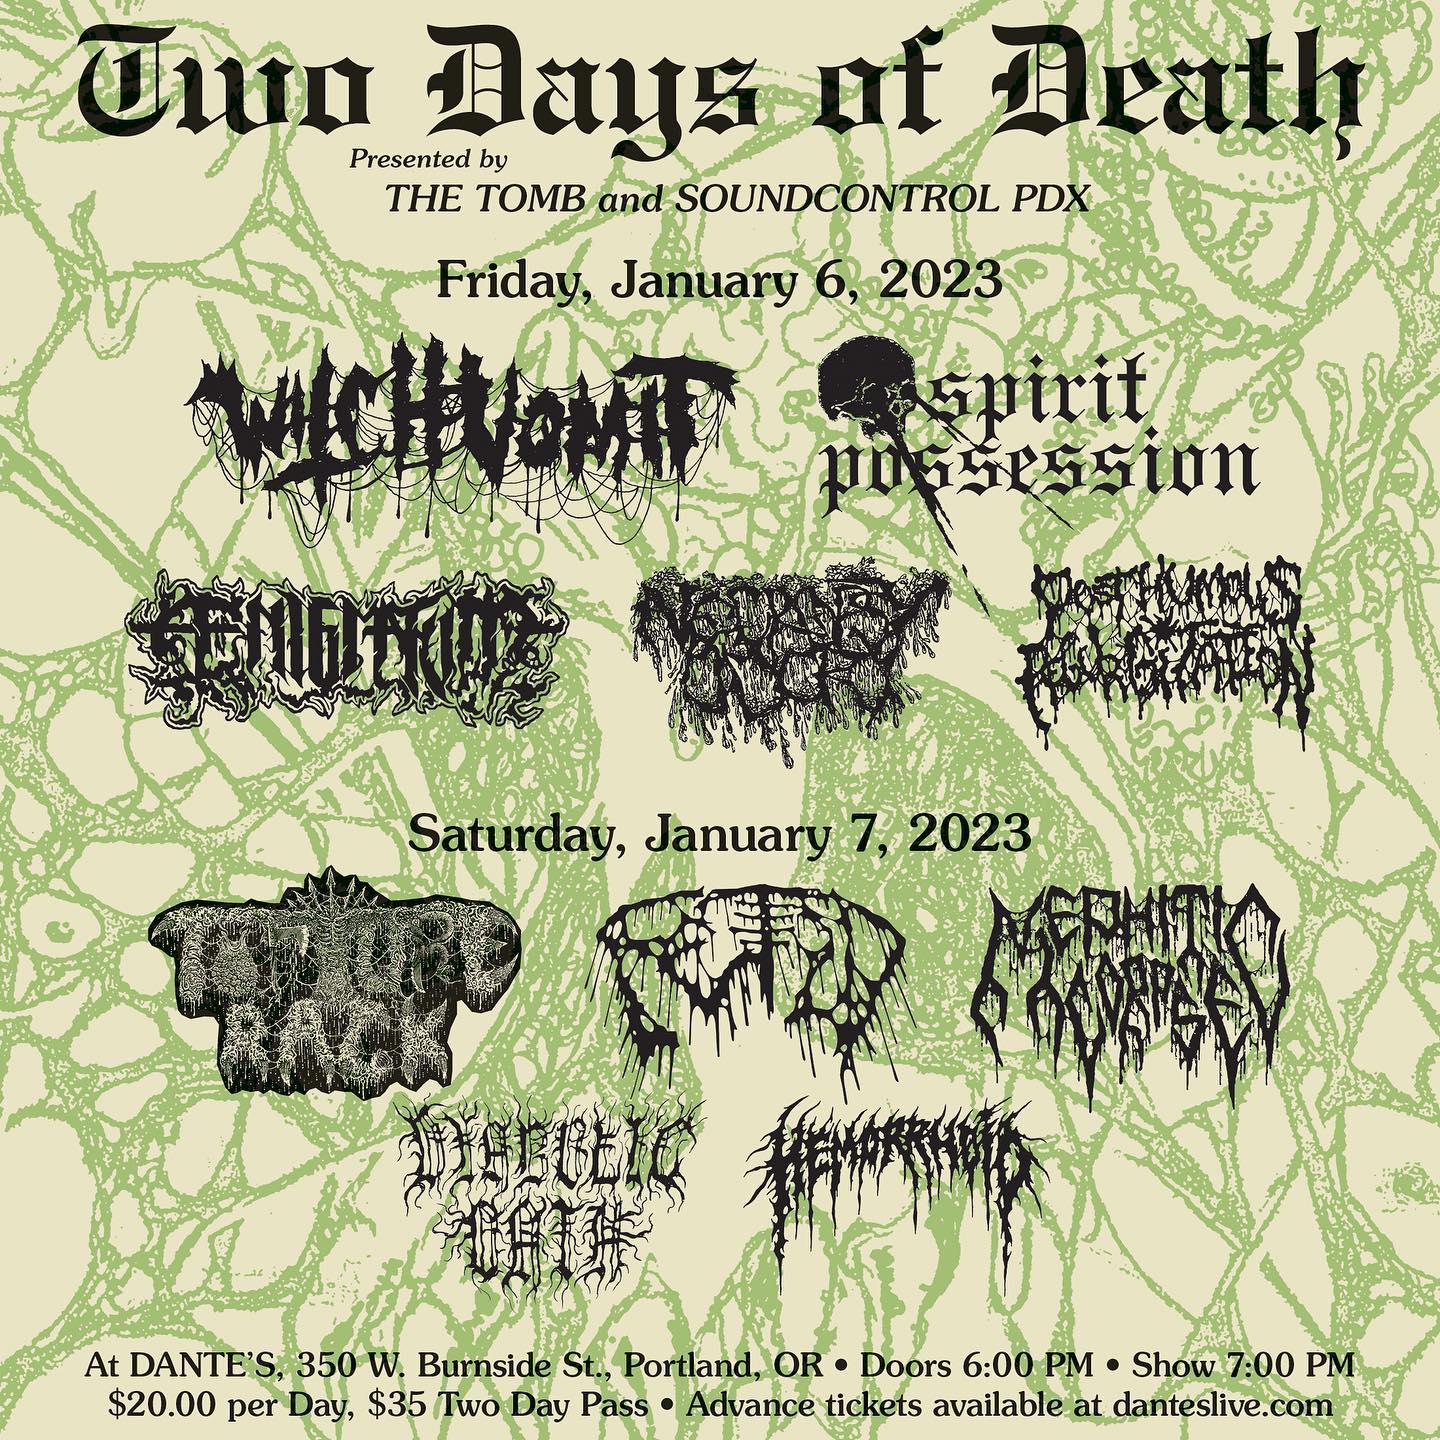 Two Days of Death